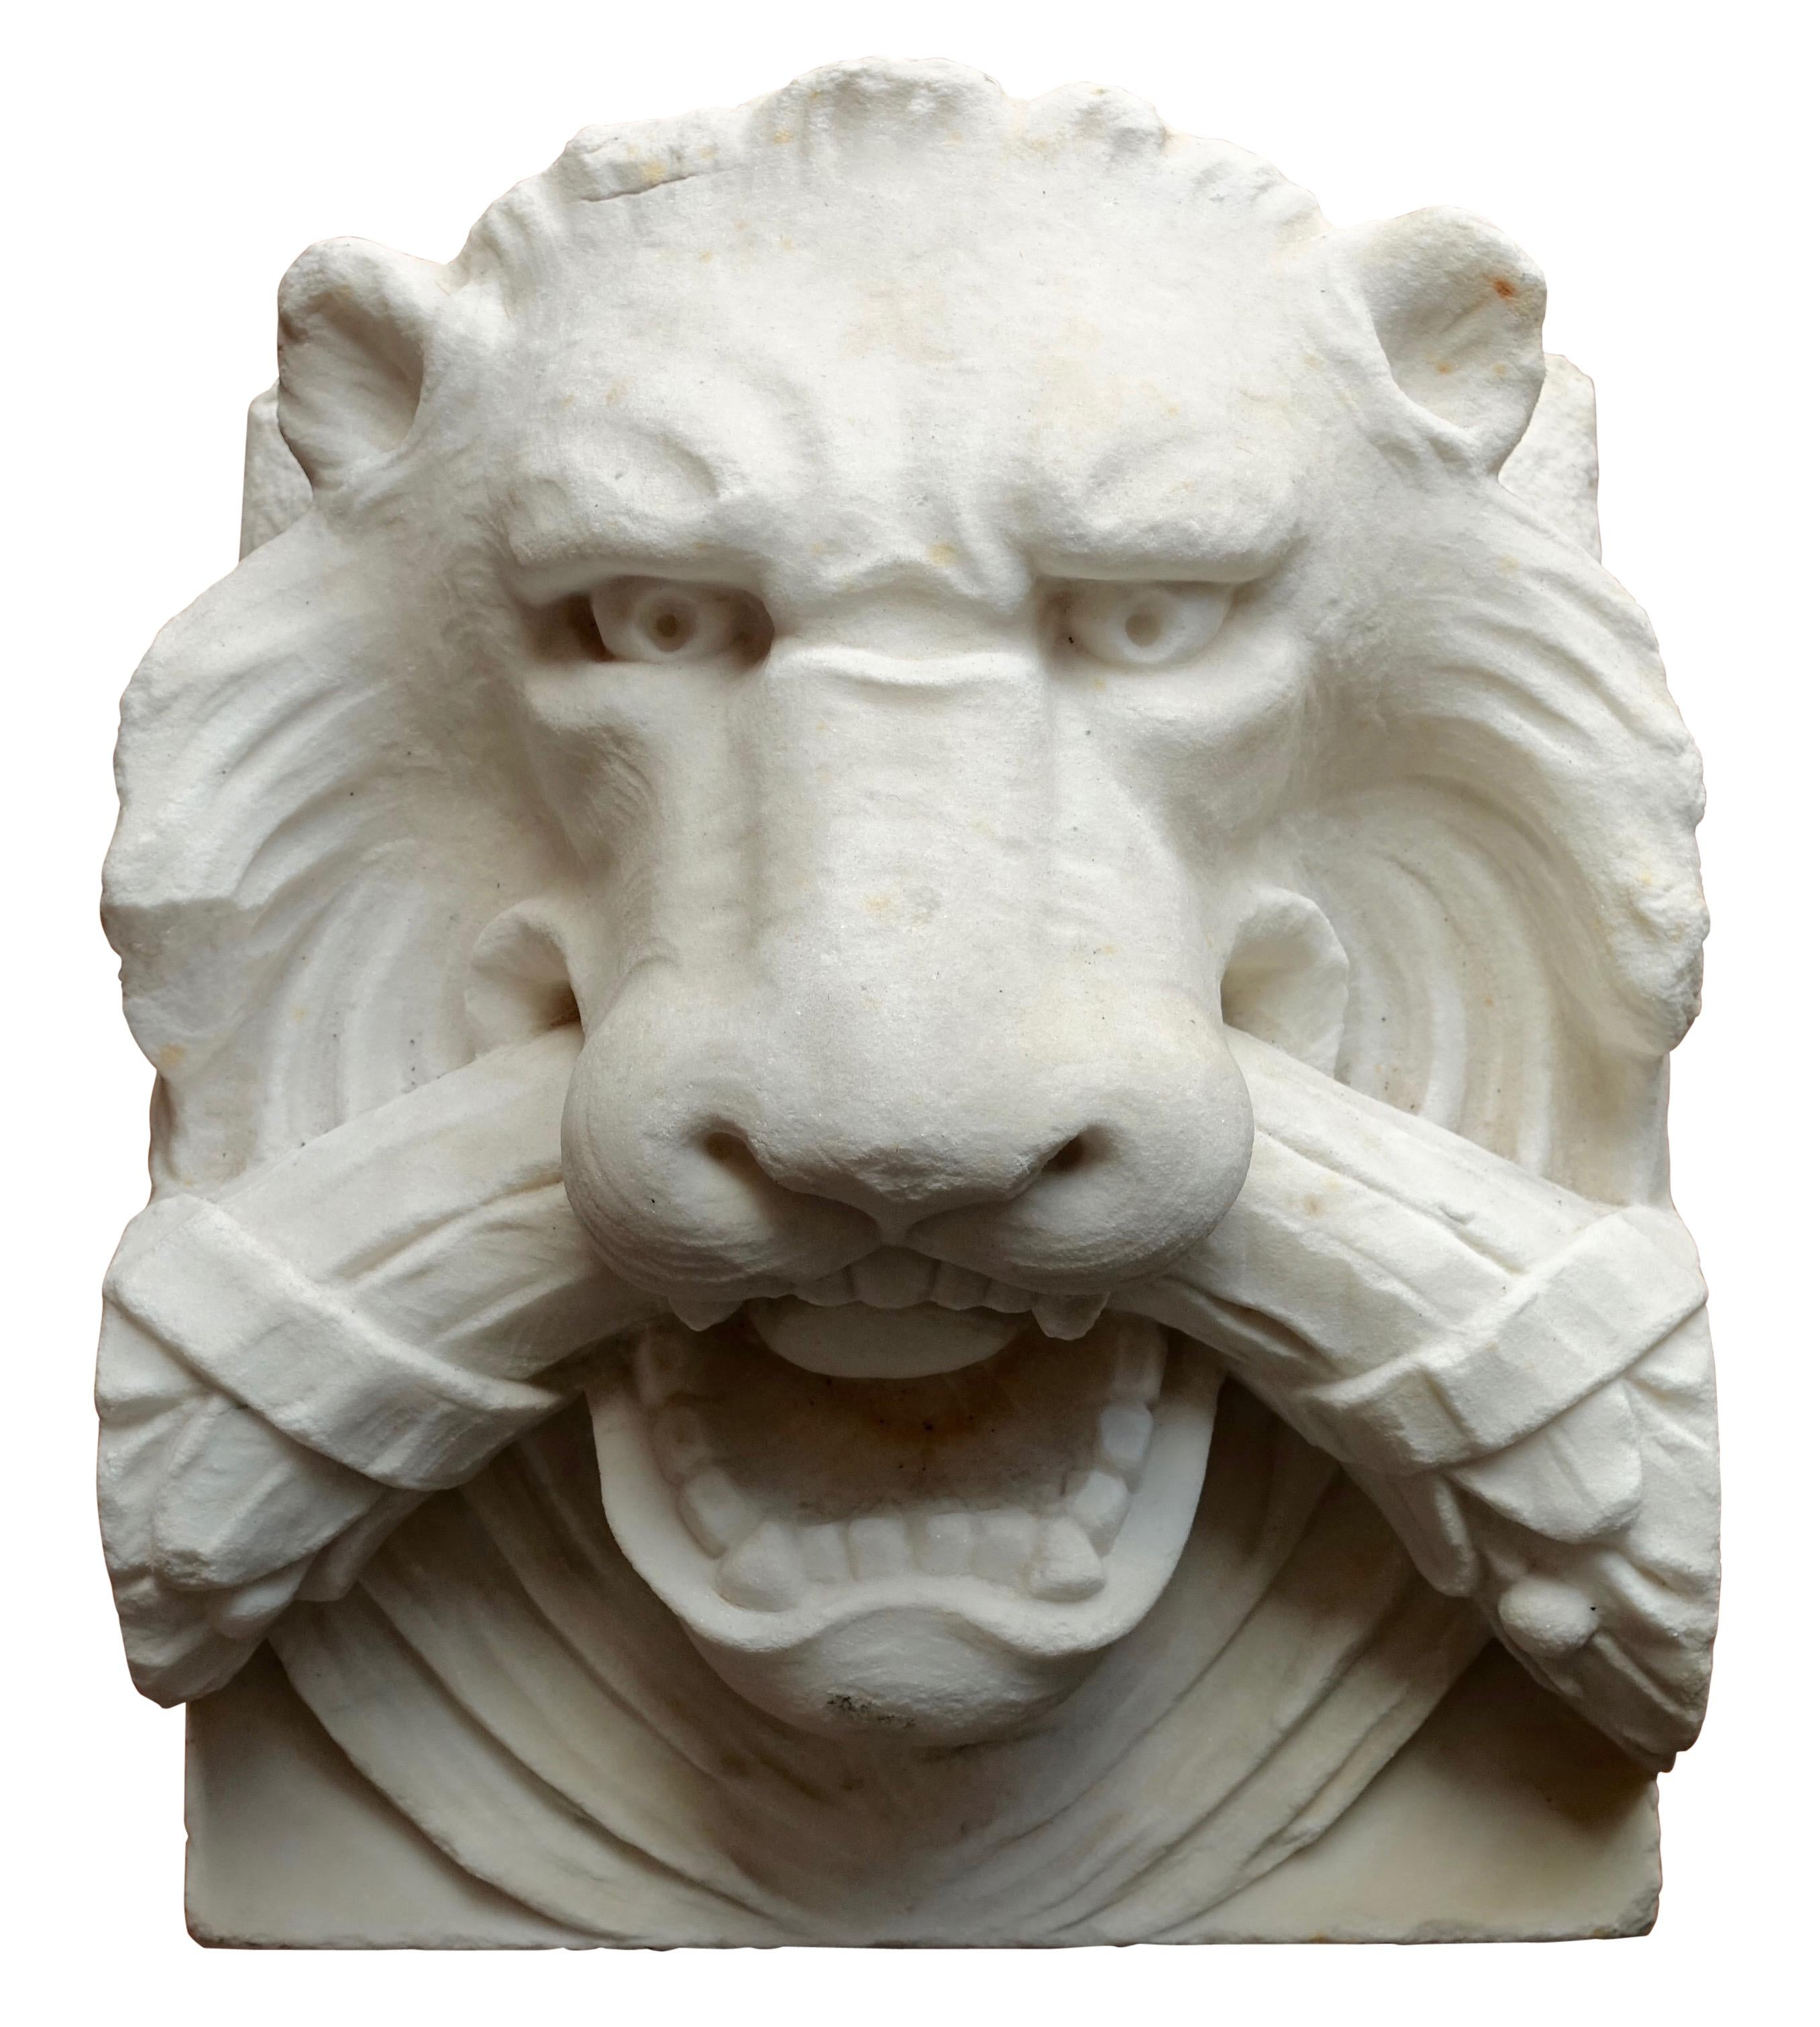 A wonderfully detailed carved white marble architectural element or sculpture of a lion head. European 19th century.